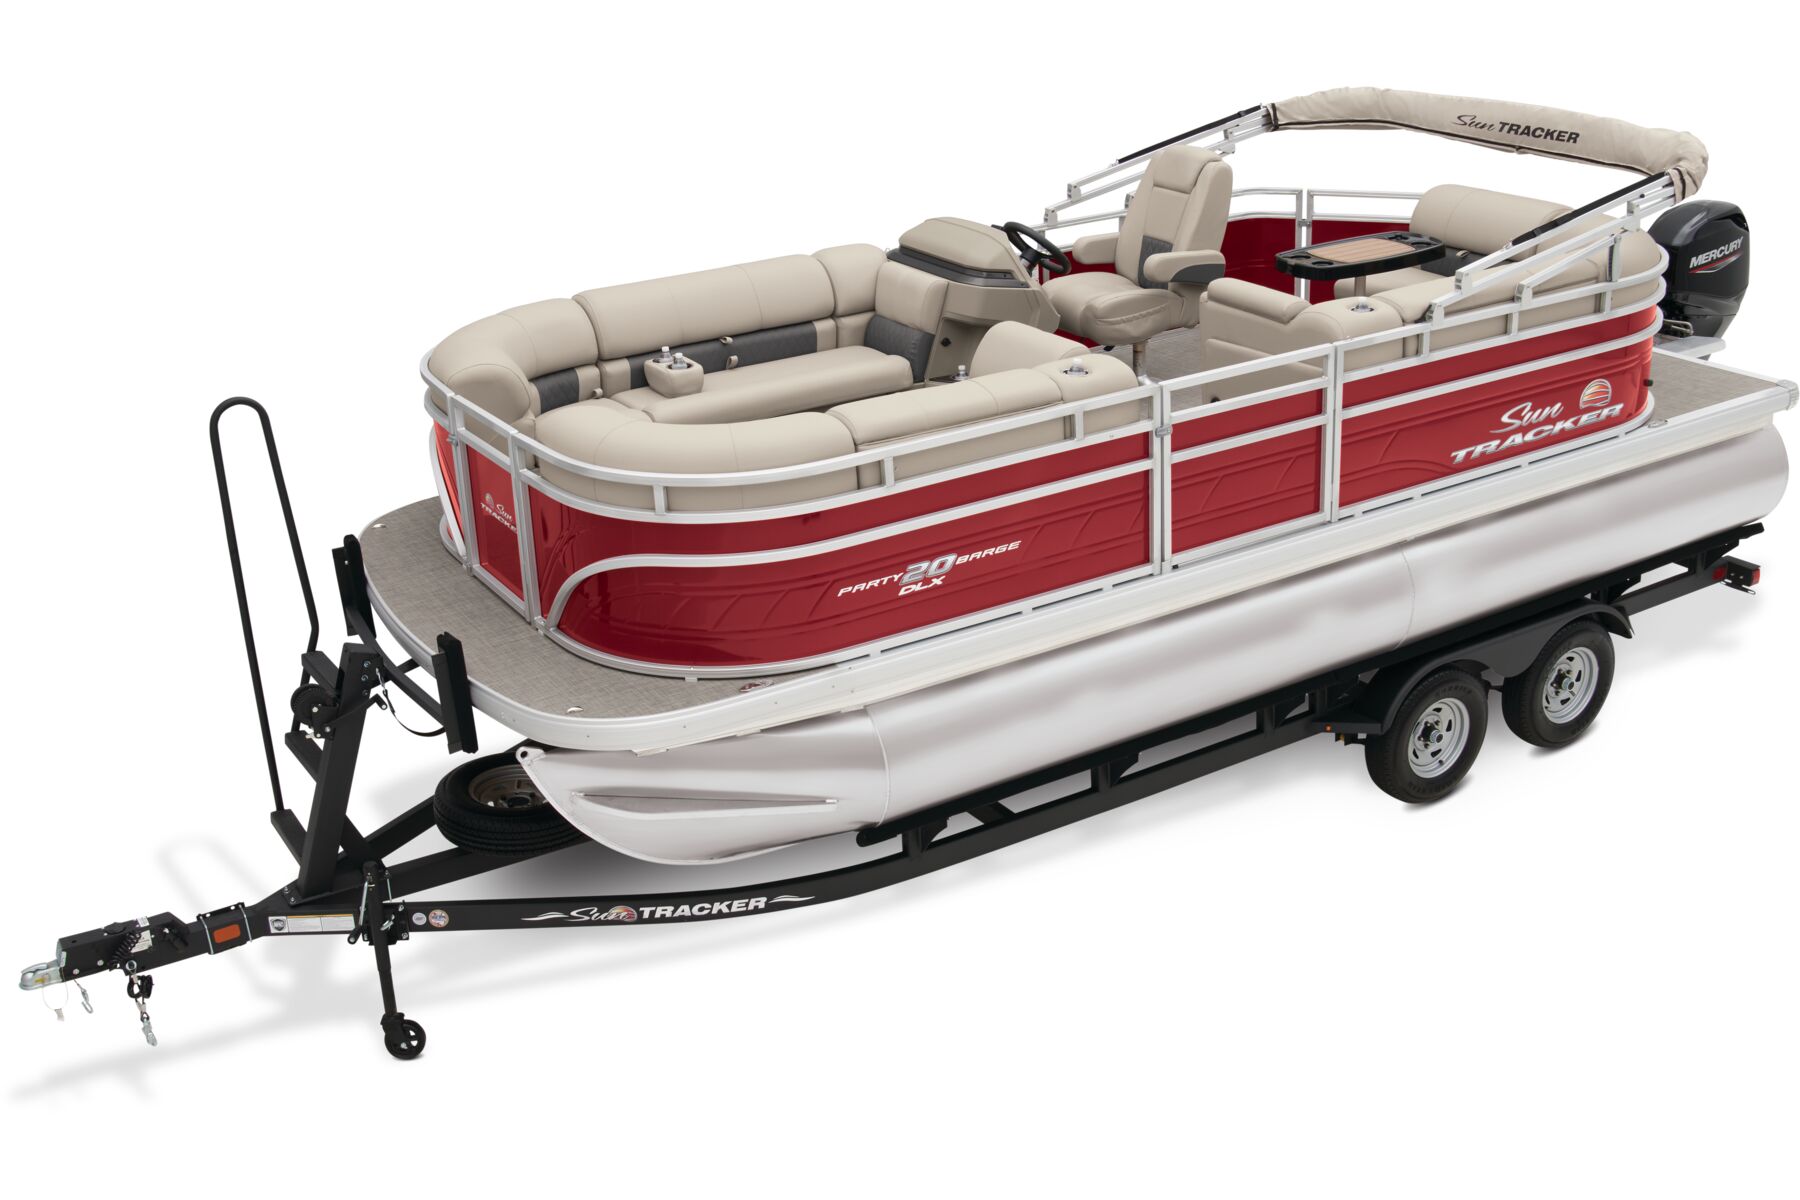 PARTY BARGE 20 DLX - SUN TRACKER Recreational Pontoon Boat